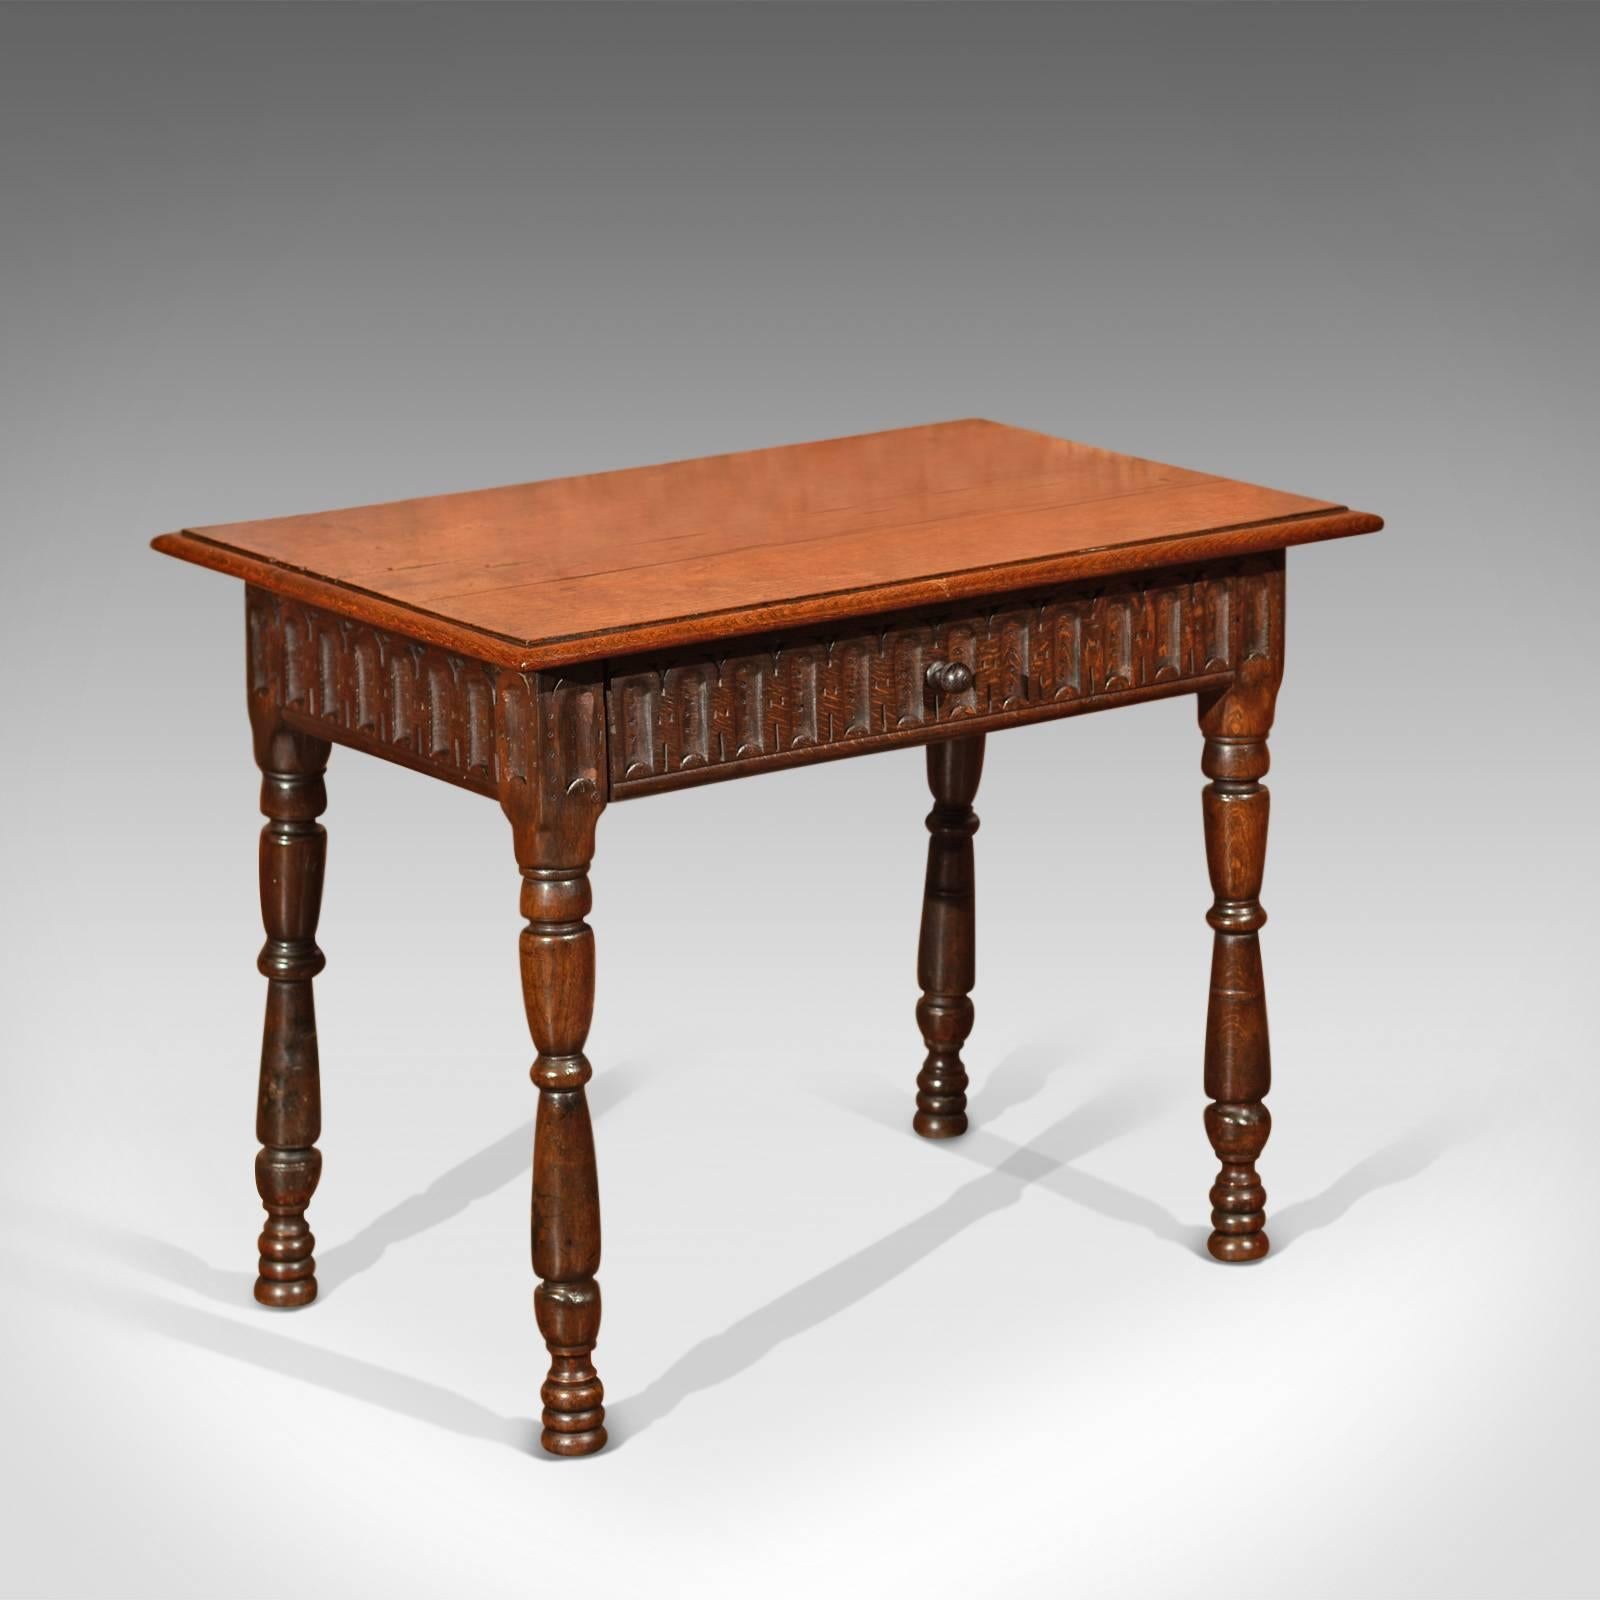 This is an antique side table dating to the mid-Victorian period, circa 1860.

Rising on unusual stout, flared and ring turned legs with triple turned 'hive' feet, this side table displays a carved frieze on all sides and a full width drawer with